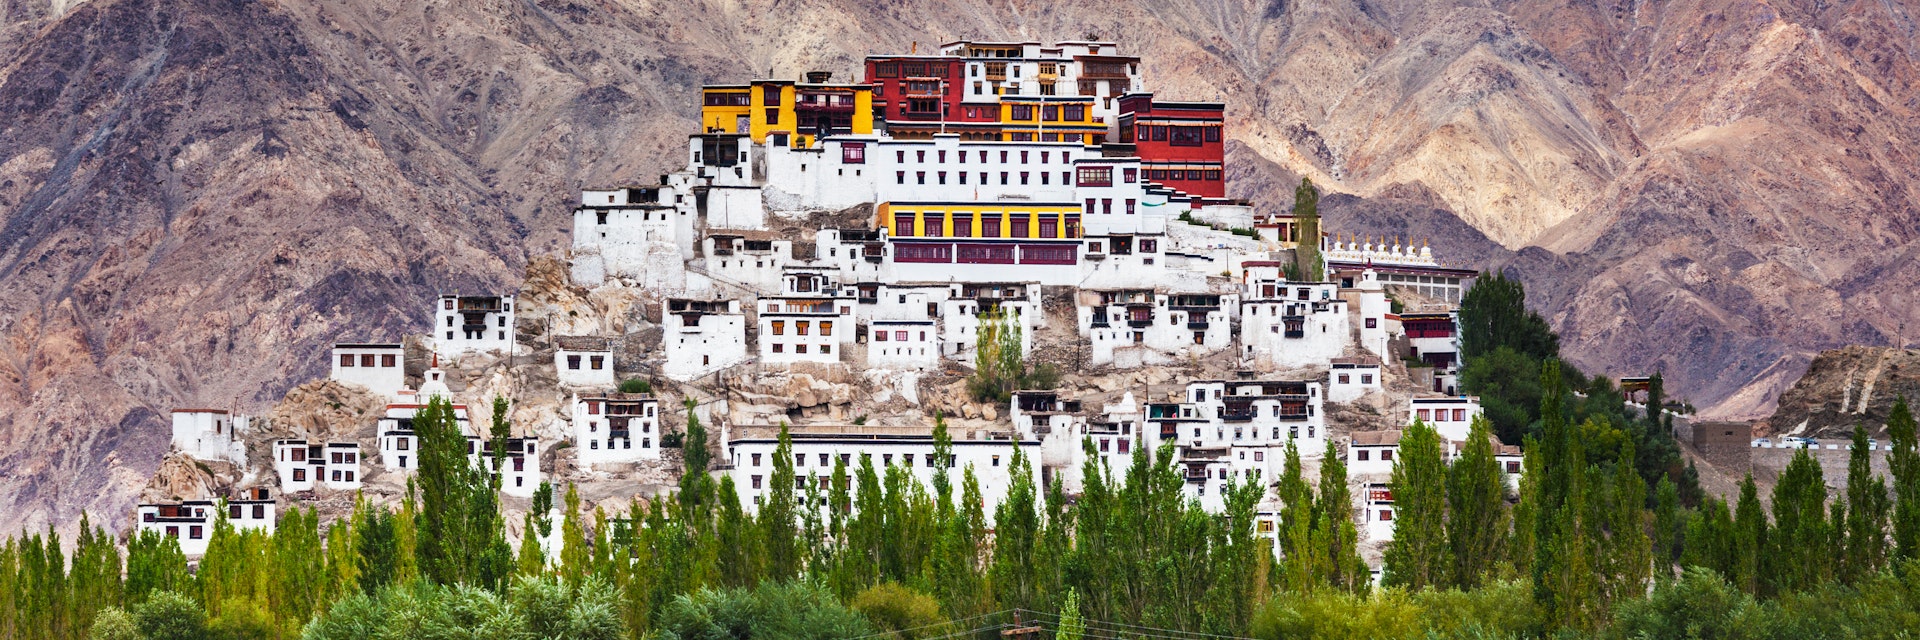 Thikse Gompa or Thikse Monastery (also transliterated from Ladakhi as Tikse, Tiksey or Thiksey) - Tibetan Buddhist monastery of the Yellow Hat (Gelugpa) sect. Ladakh, Jammu and Kashmir, India; Shutterstock ID 744715432; your: Brian Healy; gl: 65050; netsuite: Lonely Planet Online Editorial; full: Best places in India